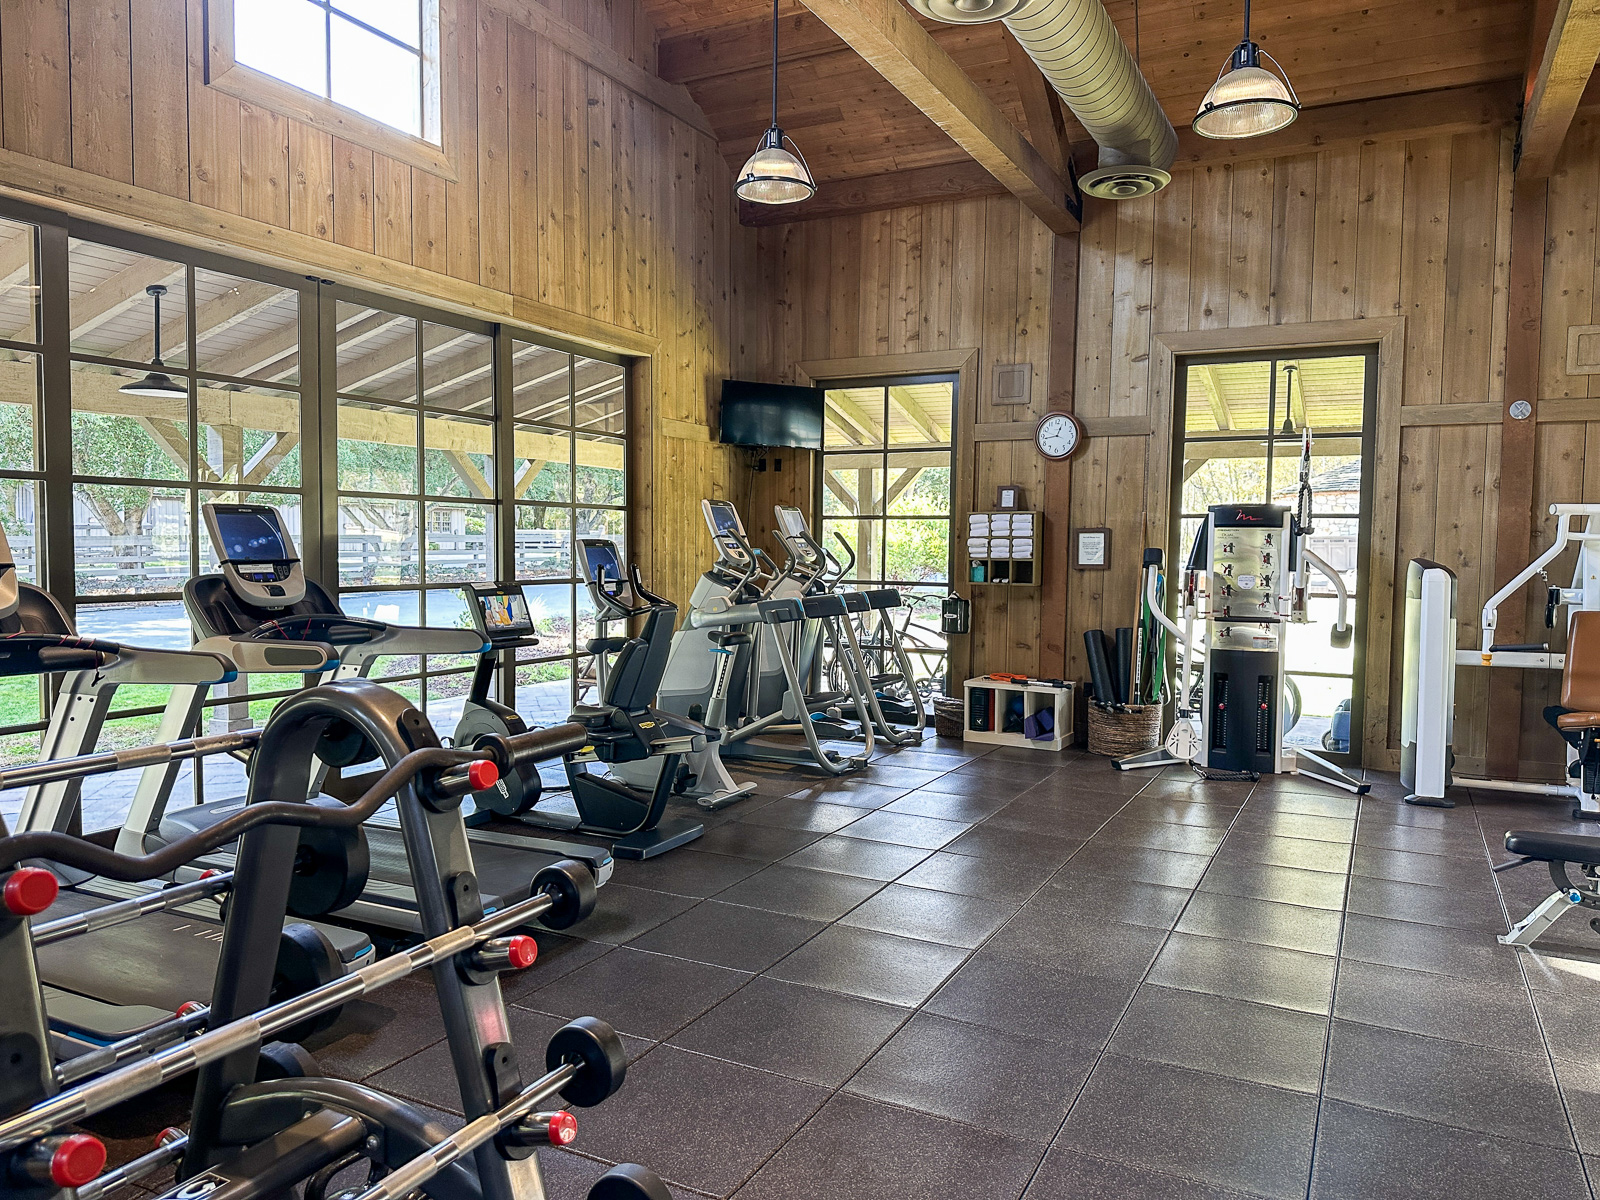 Gym at the Ranch Club.